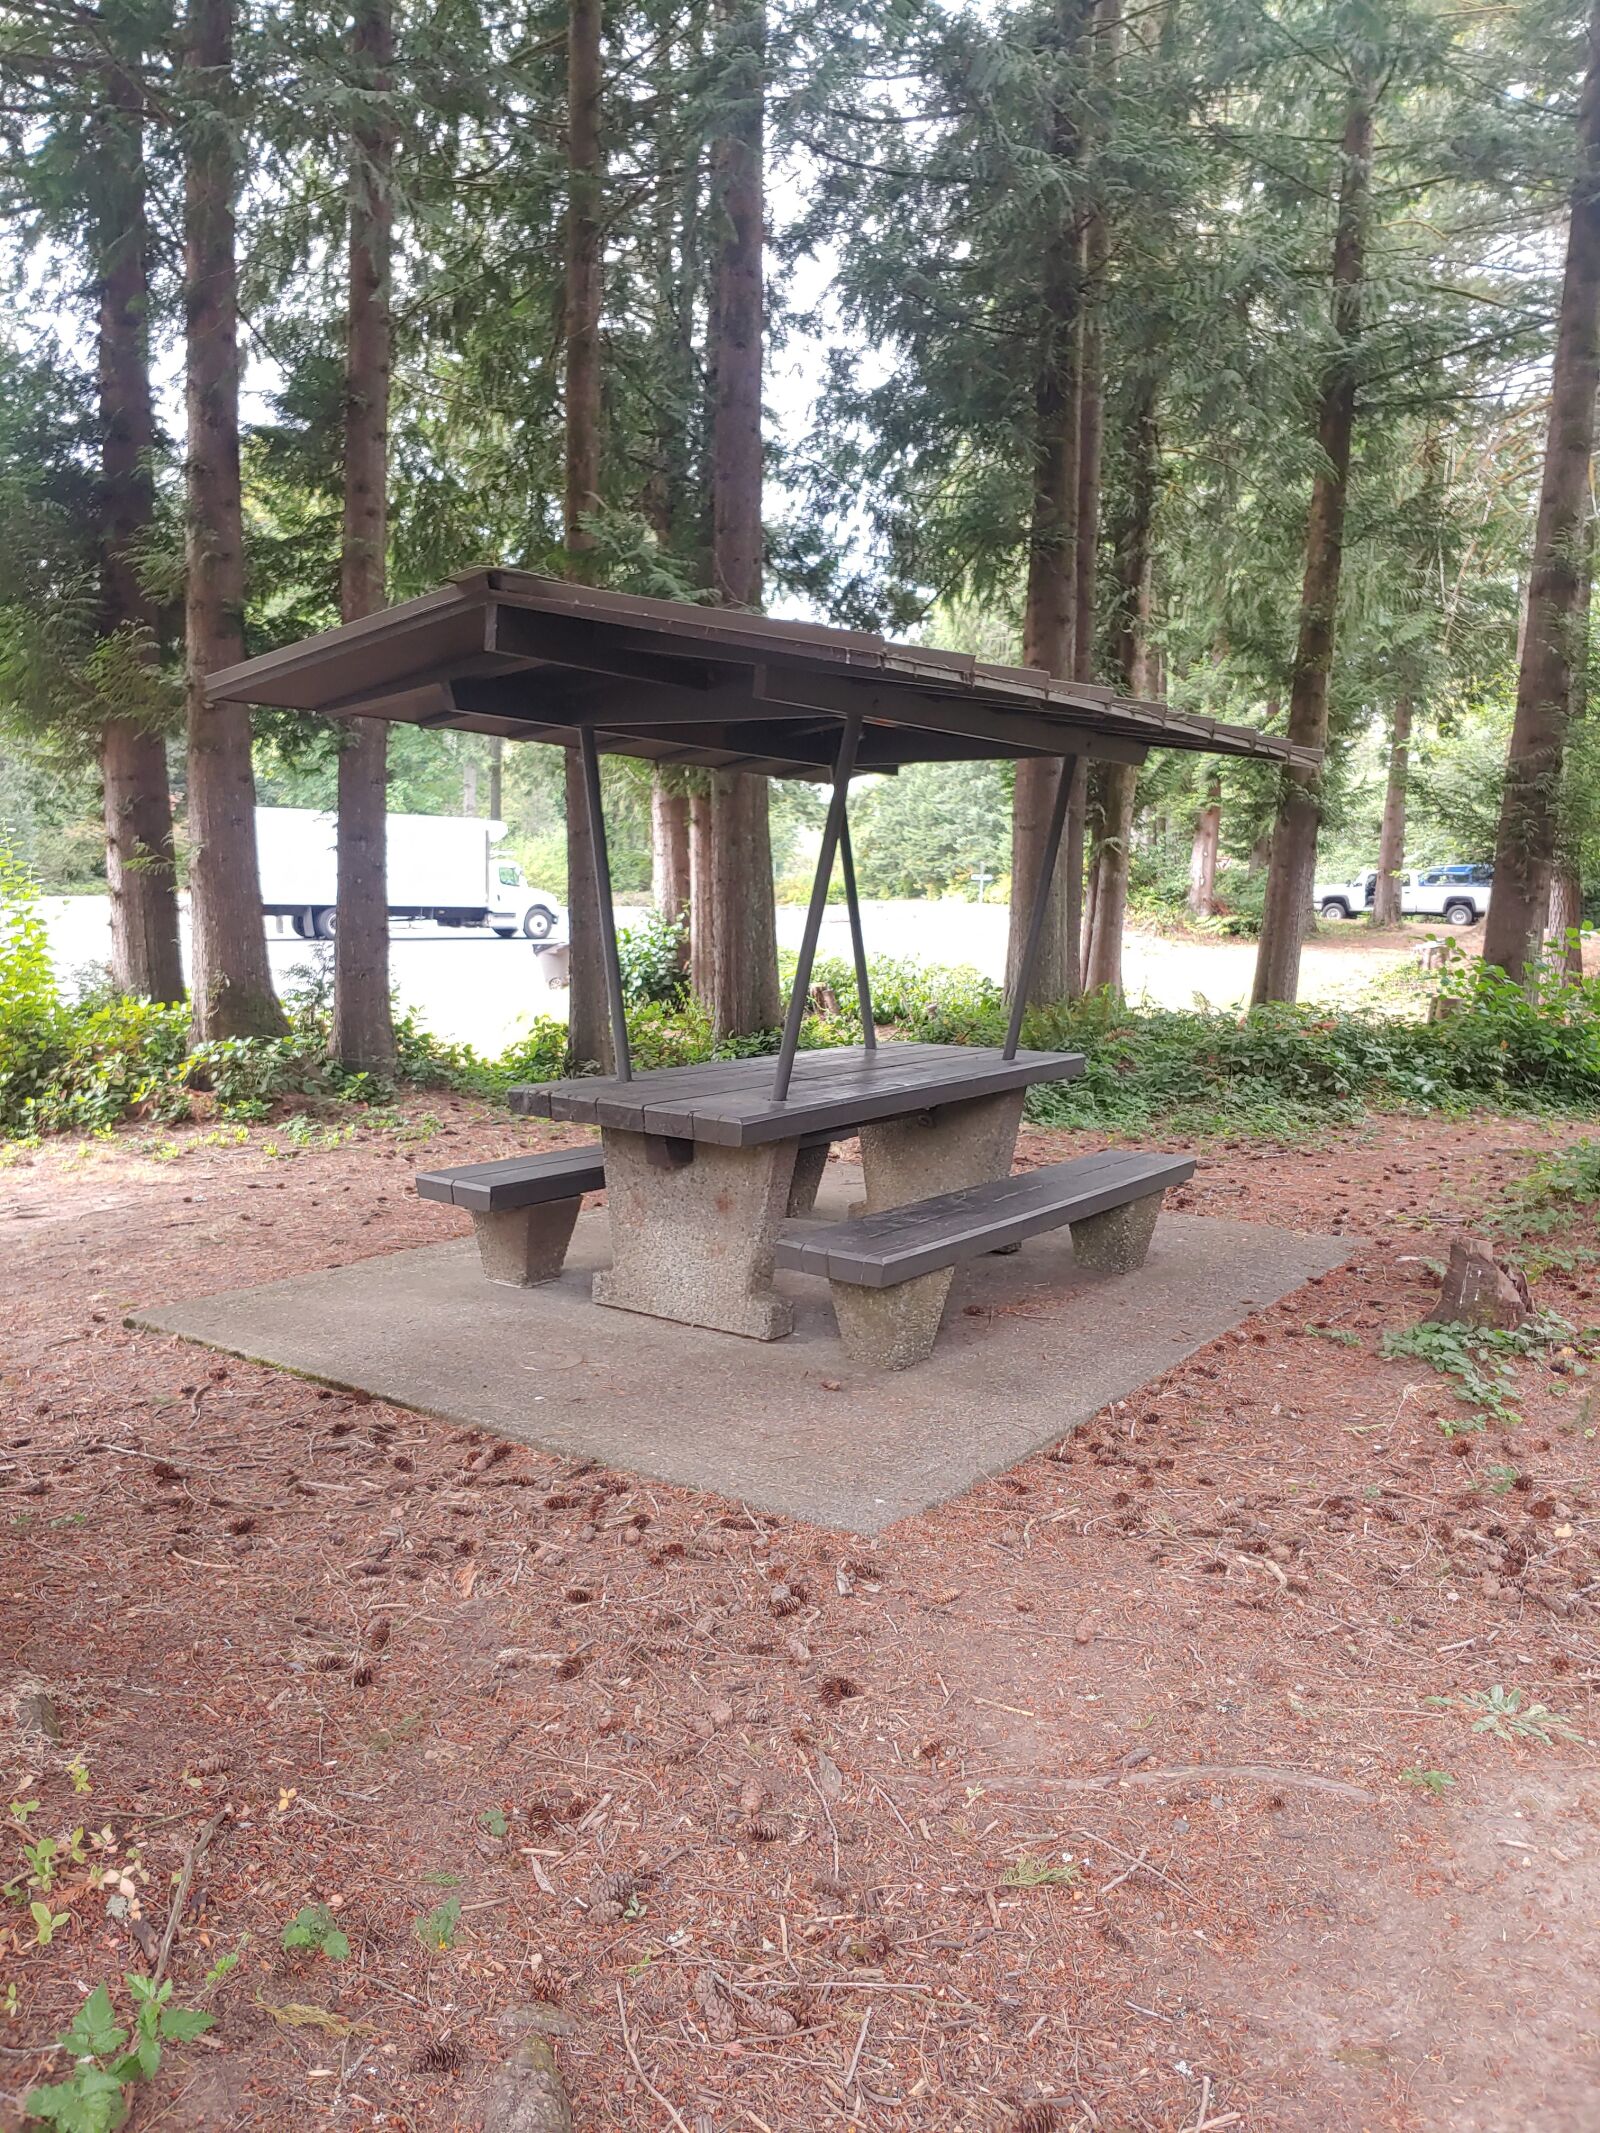 LG LM-G820 sample photo. Table, rest stop, covered photography